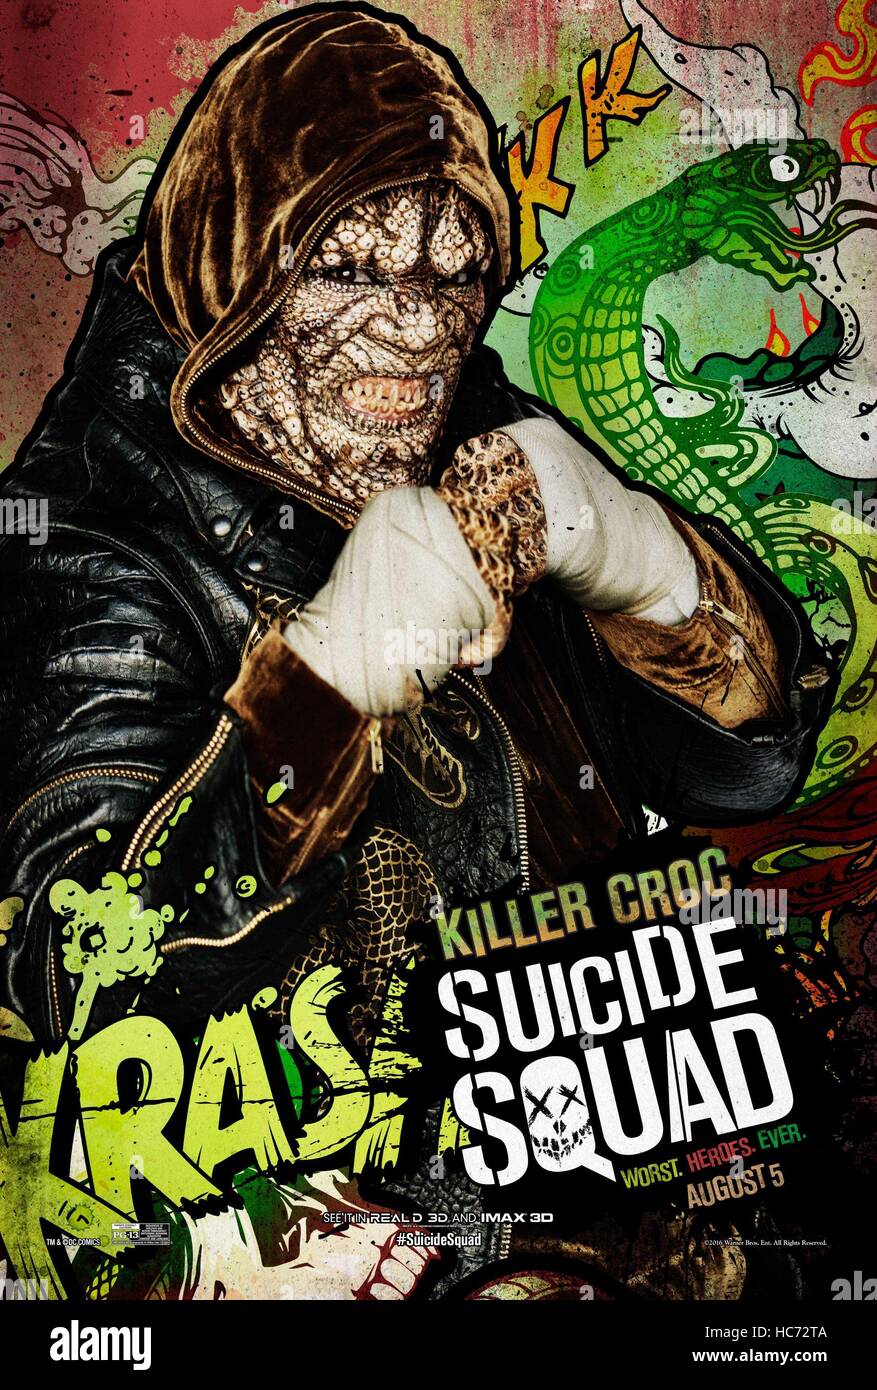 RELEASE DATE: August 5, 2016 TITLE: Suicide Squad STUDIO: Atlas Entertainment DIRECTOR: David Ayer PLOT: A secret government agency recruits imprisoned supervillains to execute dangerous black ops missions in exchange for clemency STARRING: Dewale Akinnuoye-Agbaje as Killer Croc poster (Credit Image: c Atlas Entertainment/Entertainment Pictures/) Stock Photo